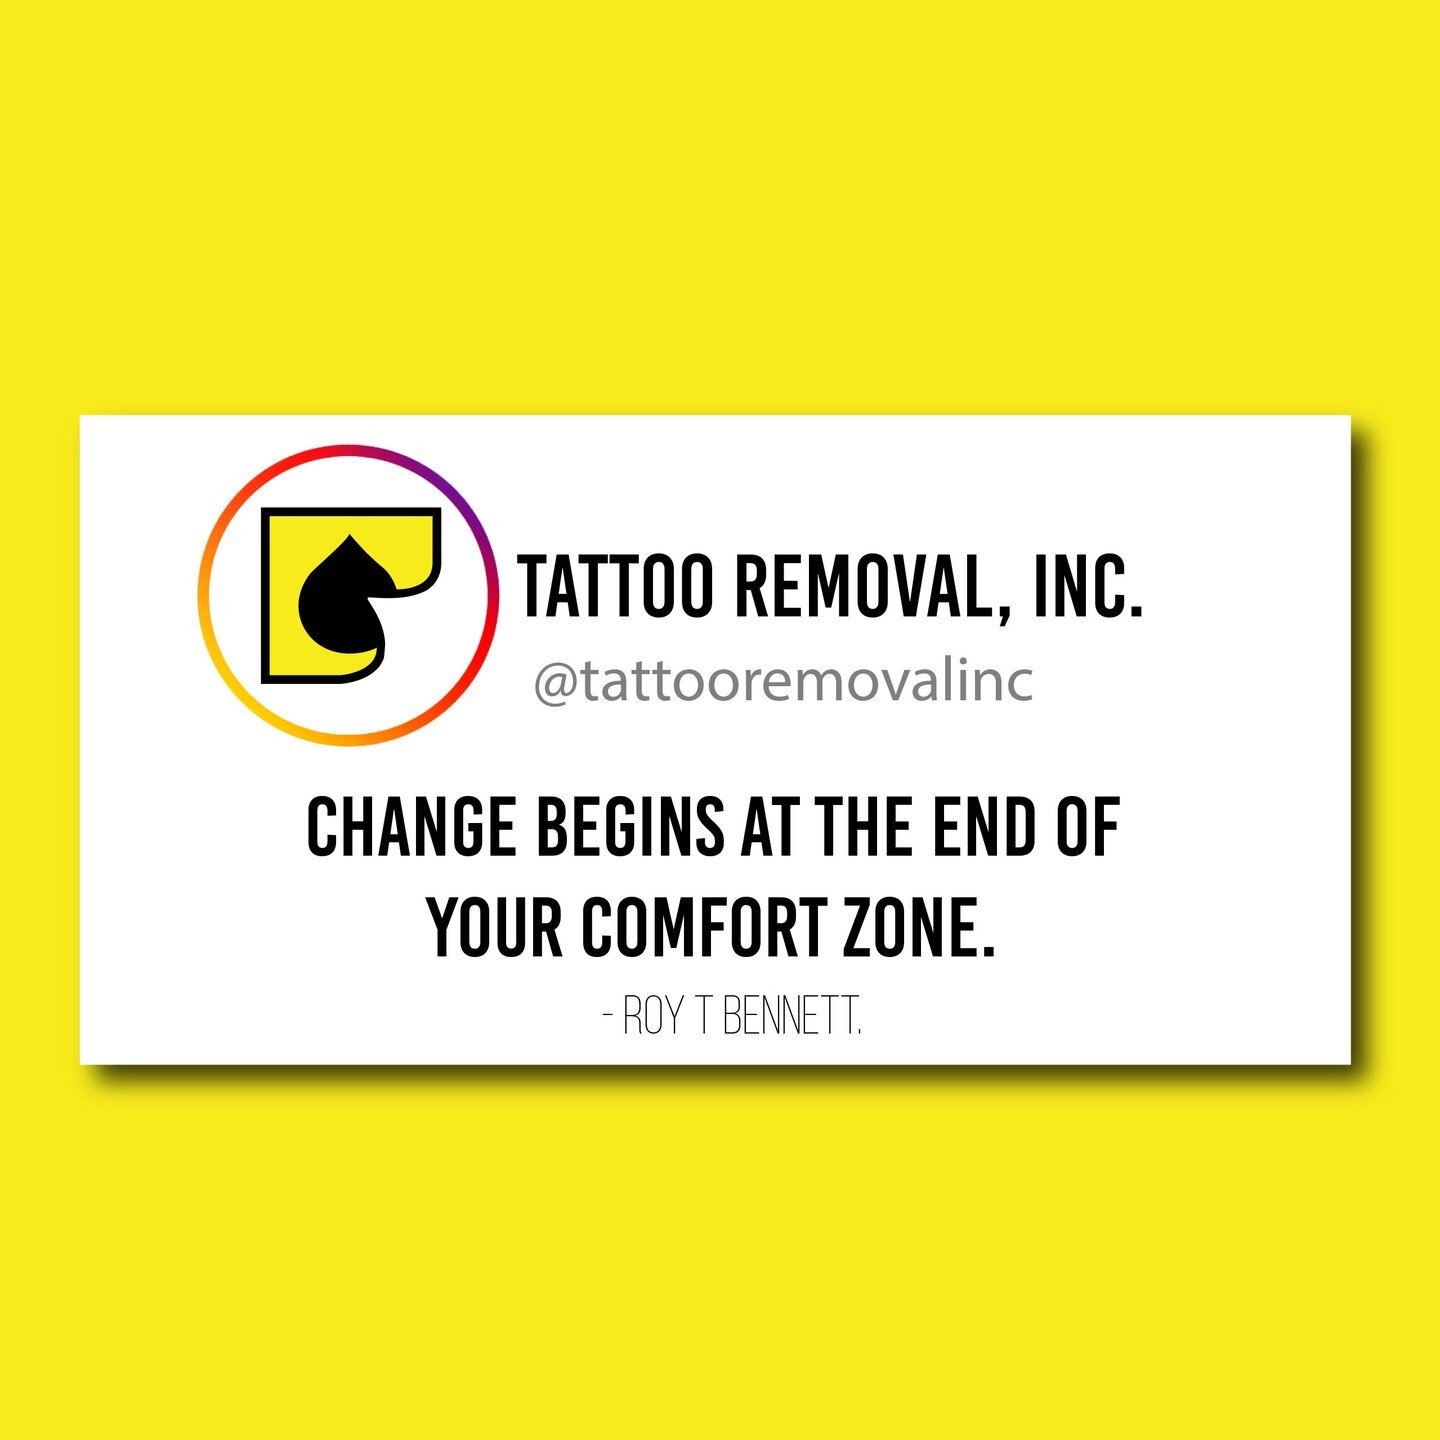 Tattoo Regrets? Are your tattoos holding you back from your dream job?
We offer laser tattoo removal at a reasonable price

☎️ Call us at: (562) 861-9400
🌐 Slide into that DM for some info - OR-
🖱 Check out the Link http://ow.ly/ES7I50Ksg9H
📍 Find